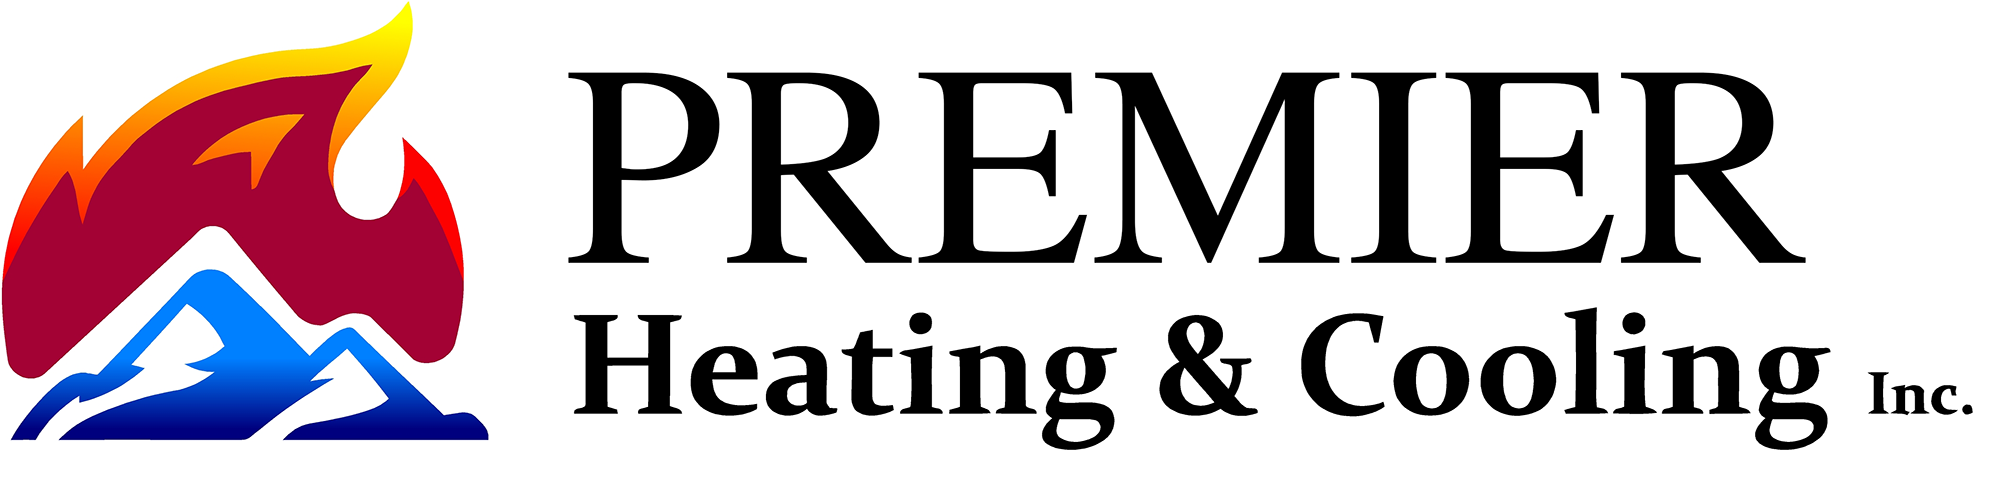 Premier Heating and Cooling – Richmond, Virginia Heating and Cooling ...